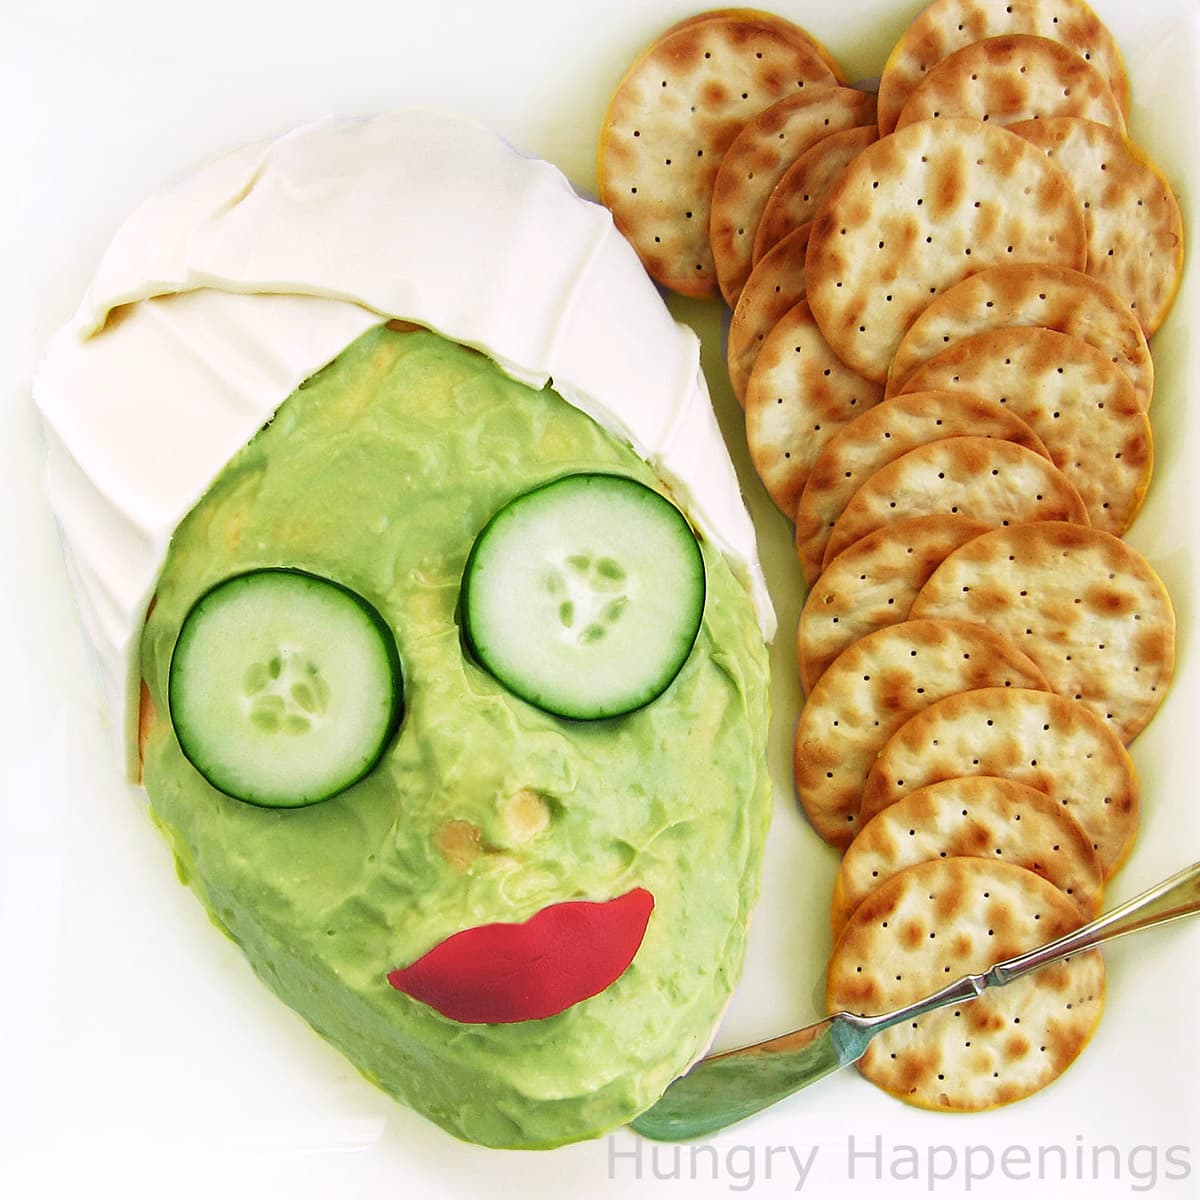 Spa party appetizer - cheese ball face covered in a mozzarella cheese wrap, a guacamole face mask, cucumbers on the eyes, and red pepper lips. Served with crackers.